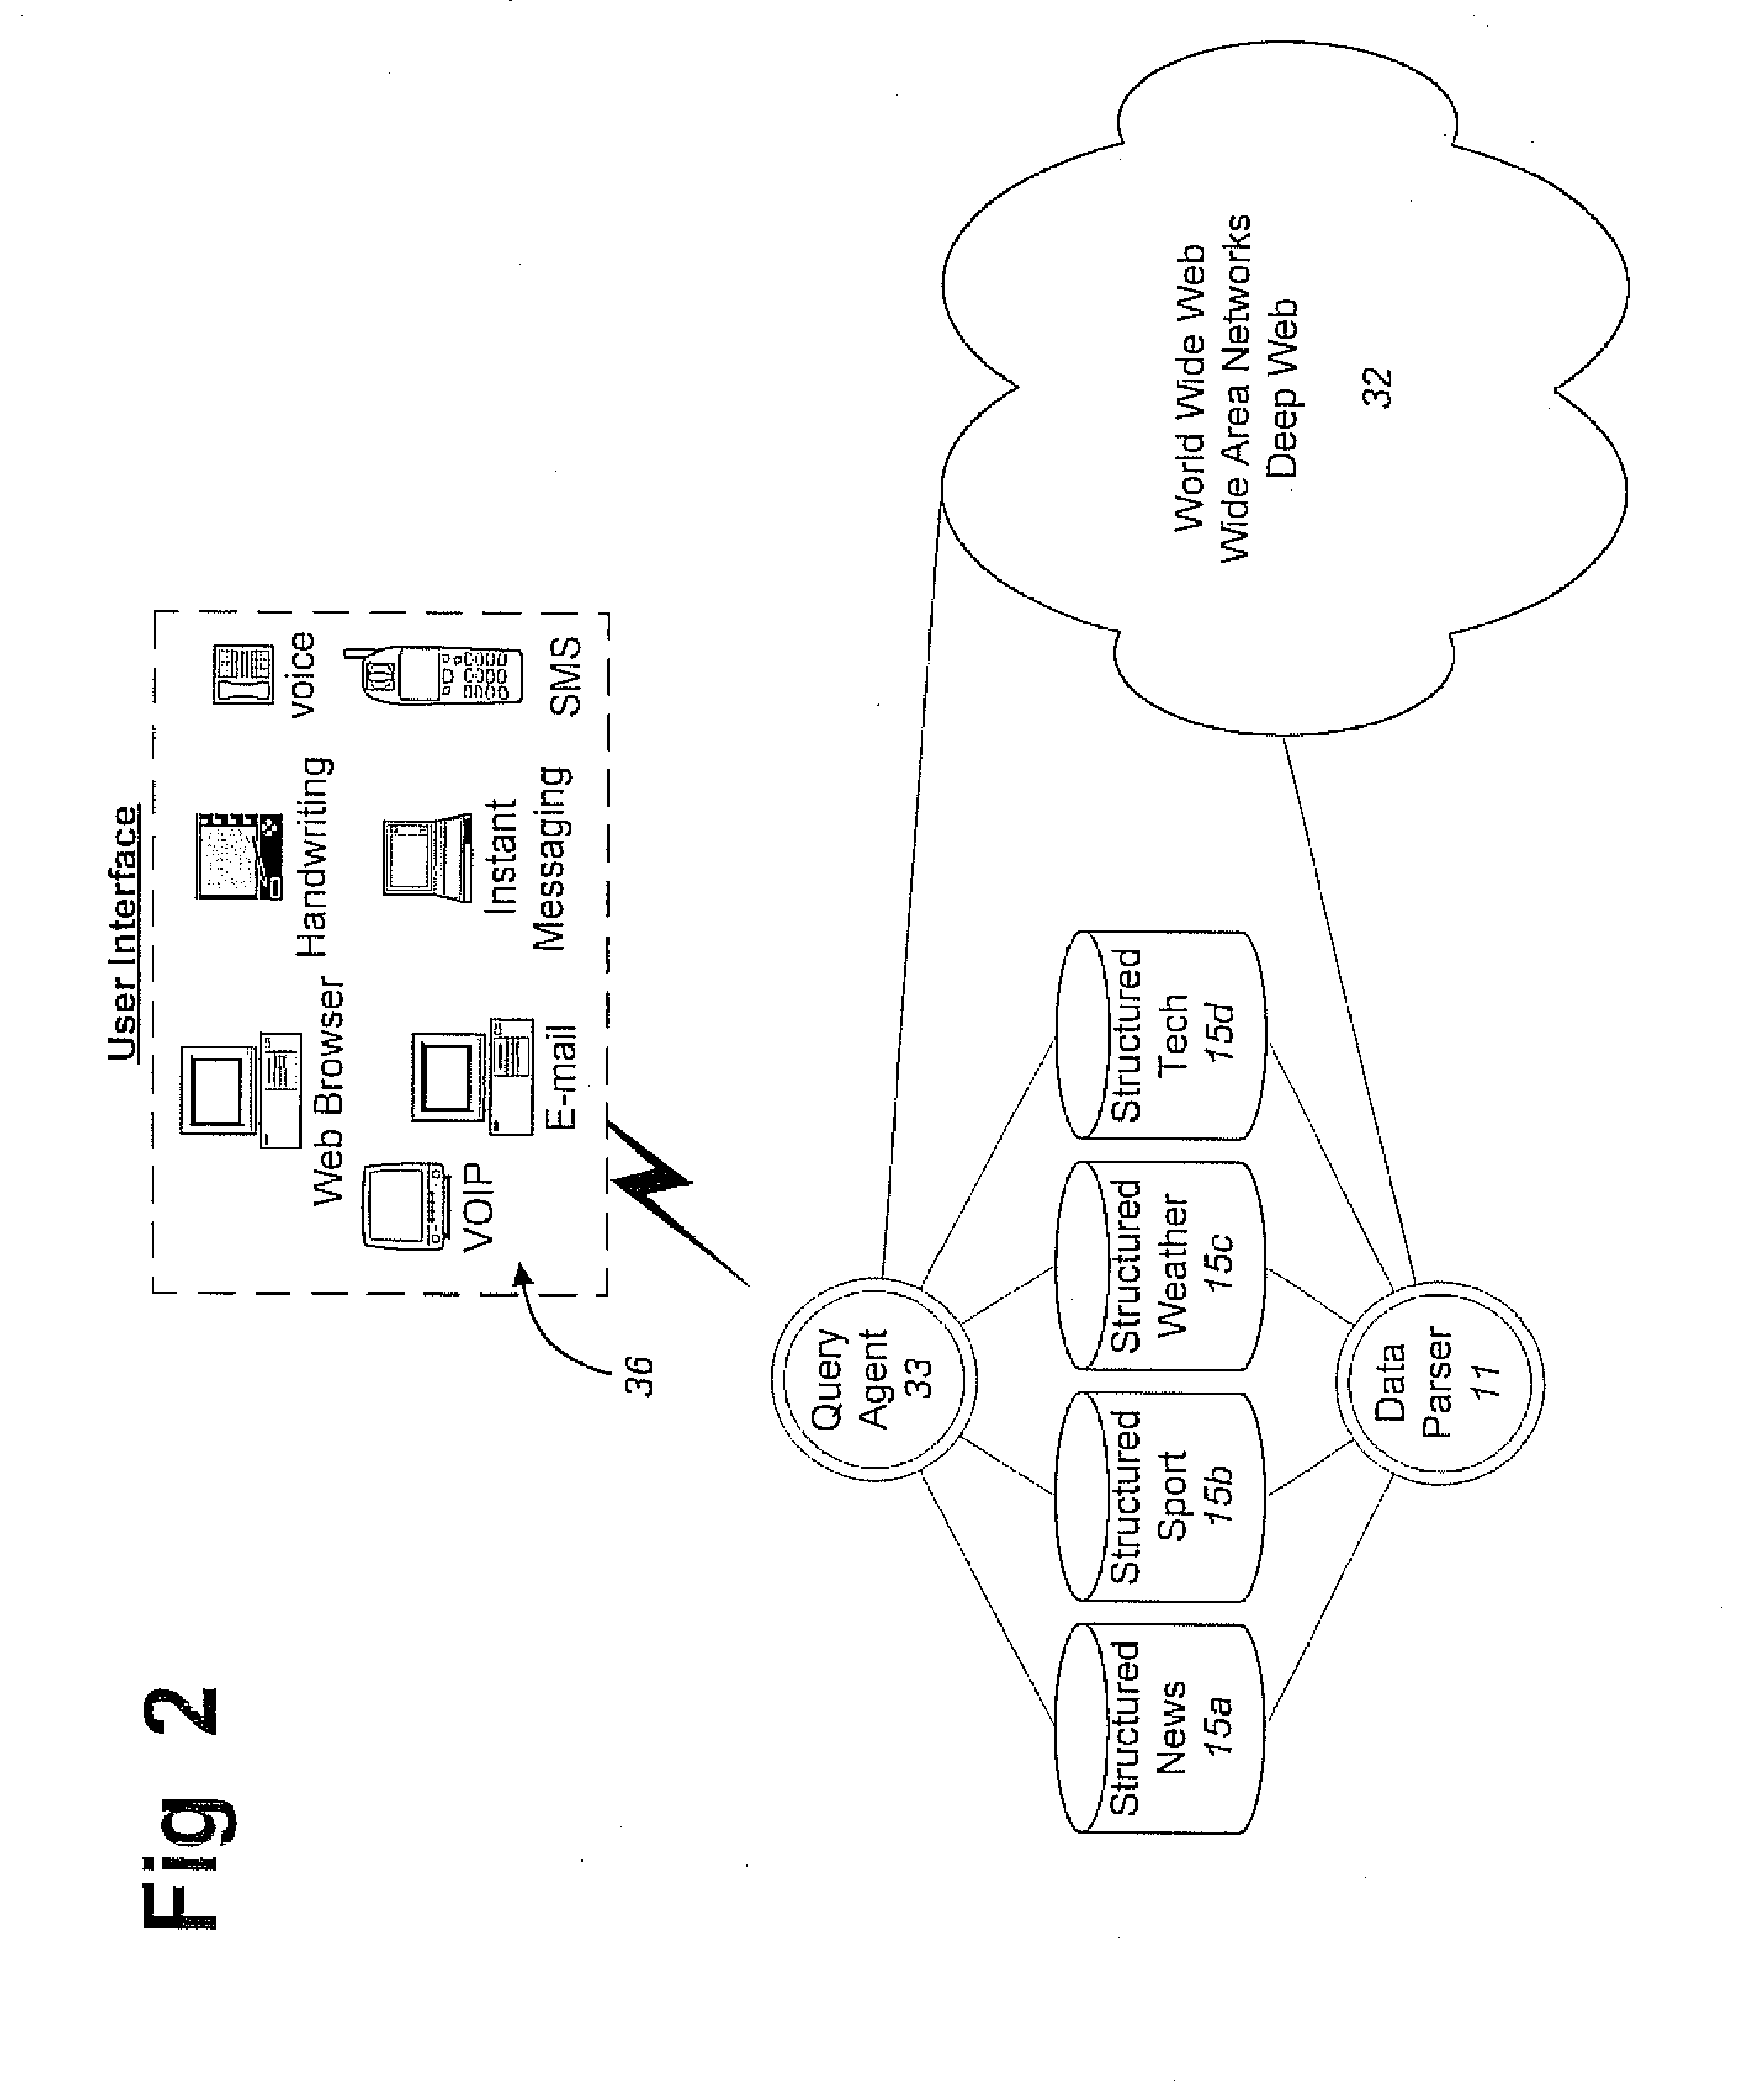 Method and system for identifying sentence boundaries